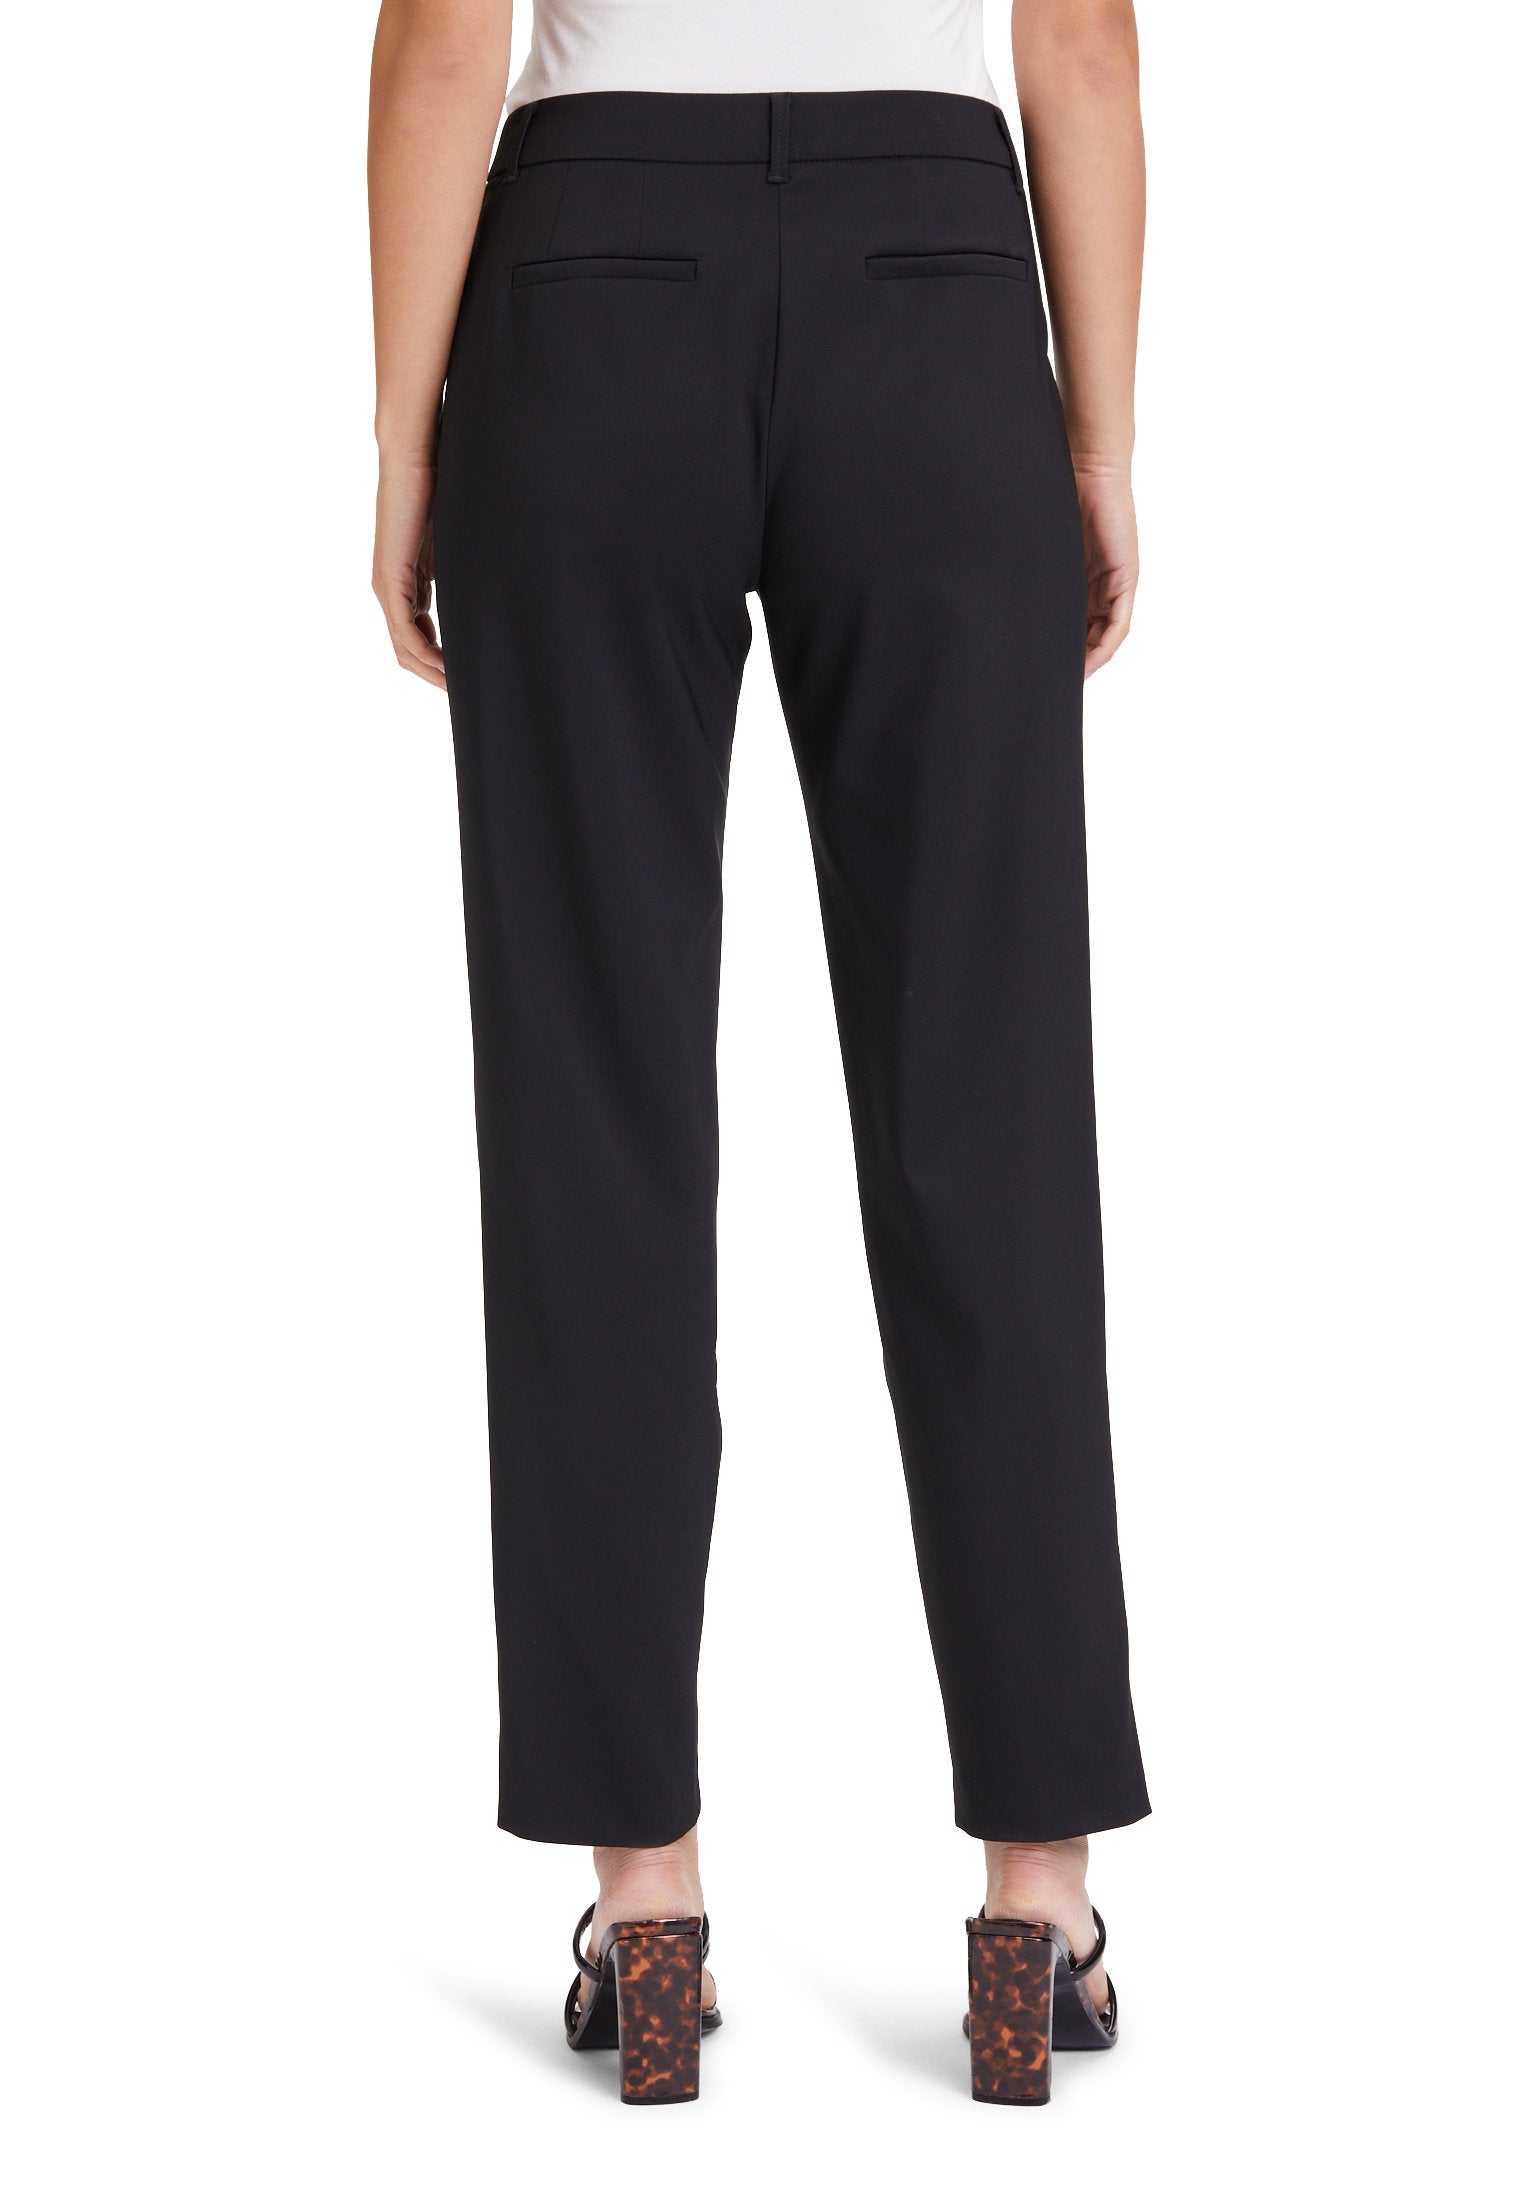 Business Trousers
With Crease_6002-1080_9045_04